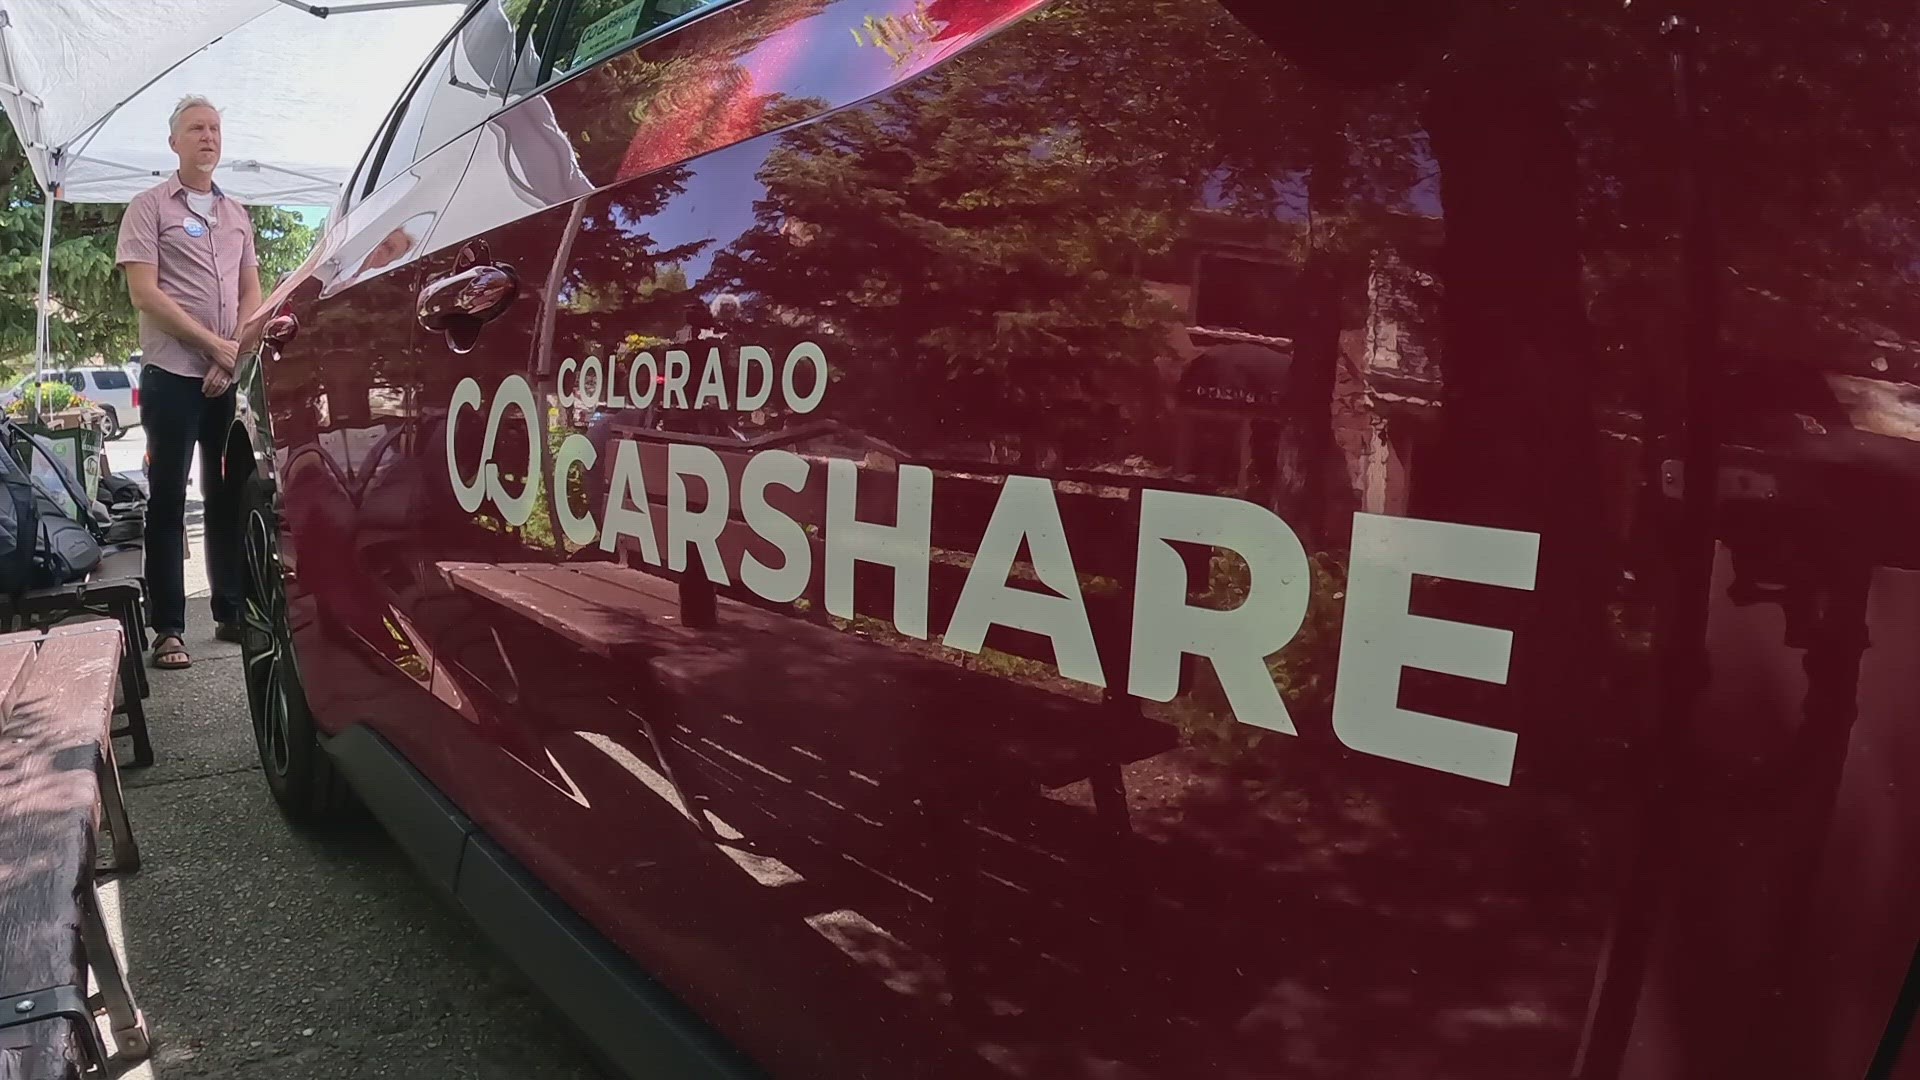 Breckenridge is getting a new carshare program and this one uses electric vehicles.